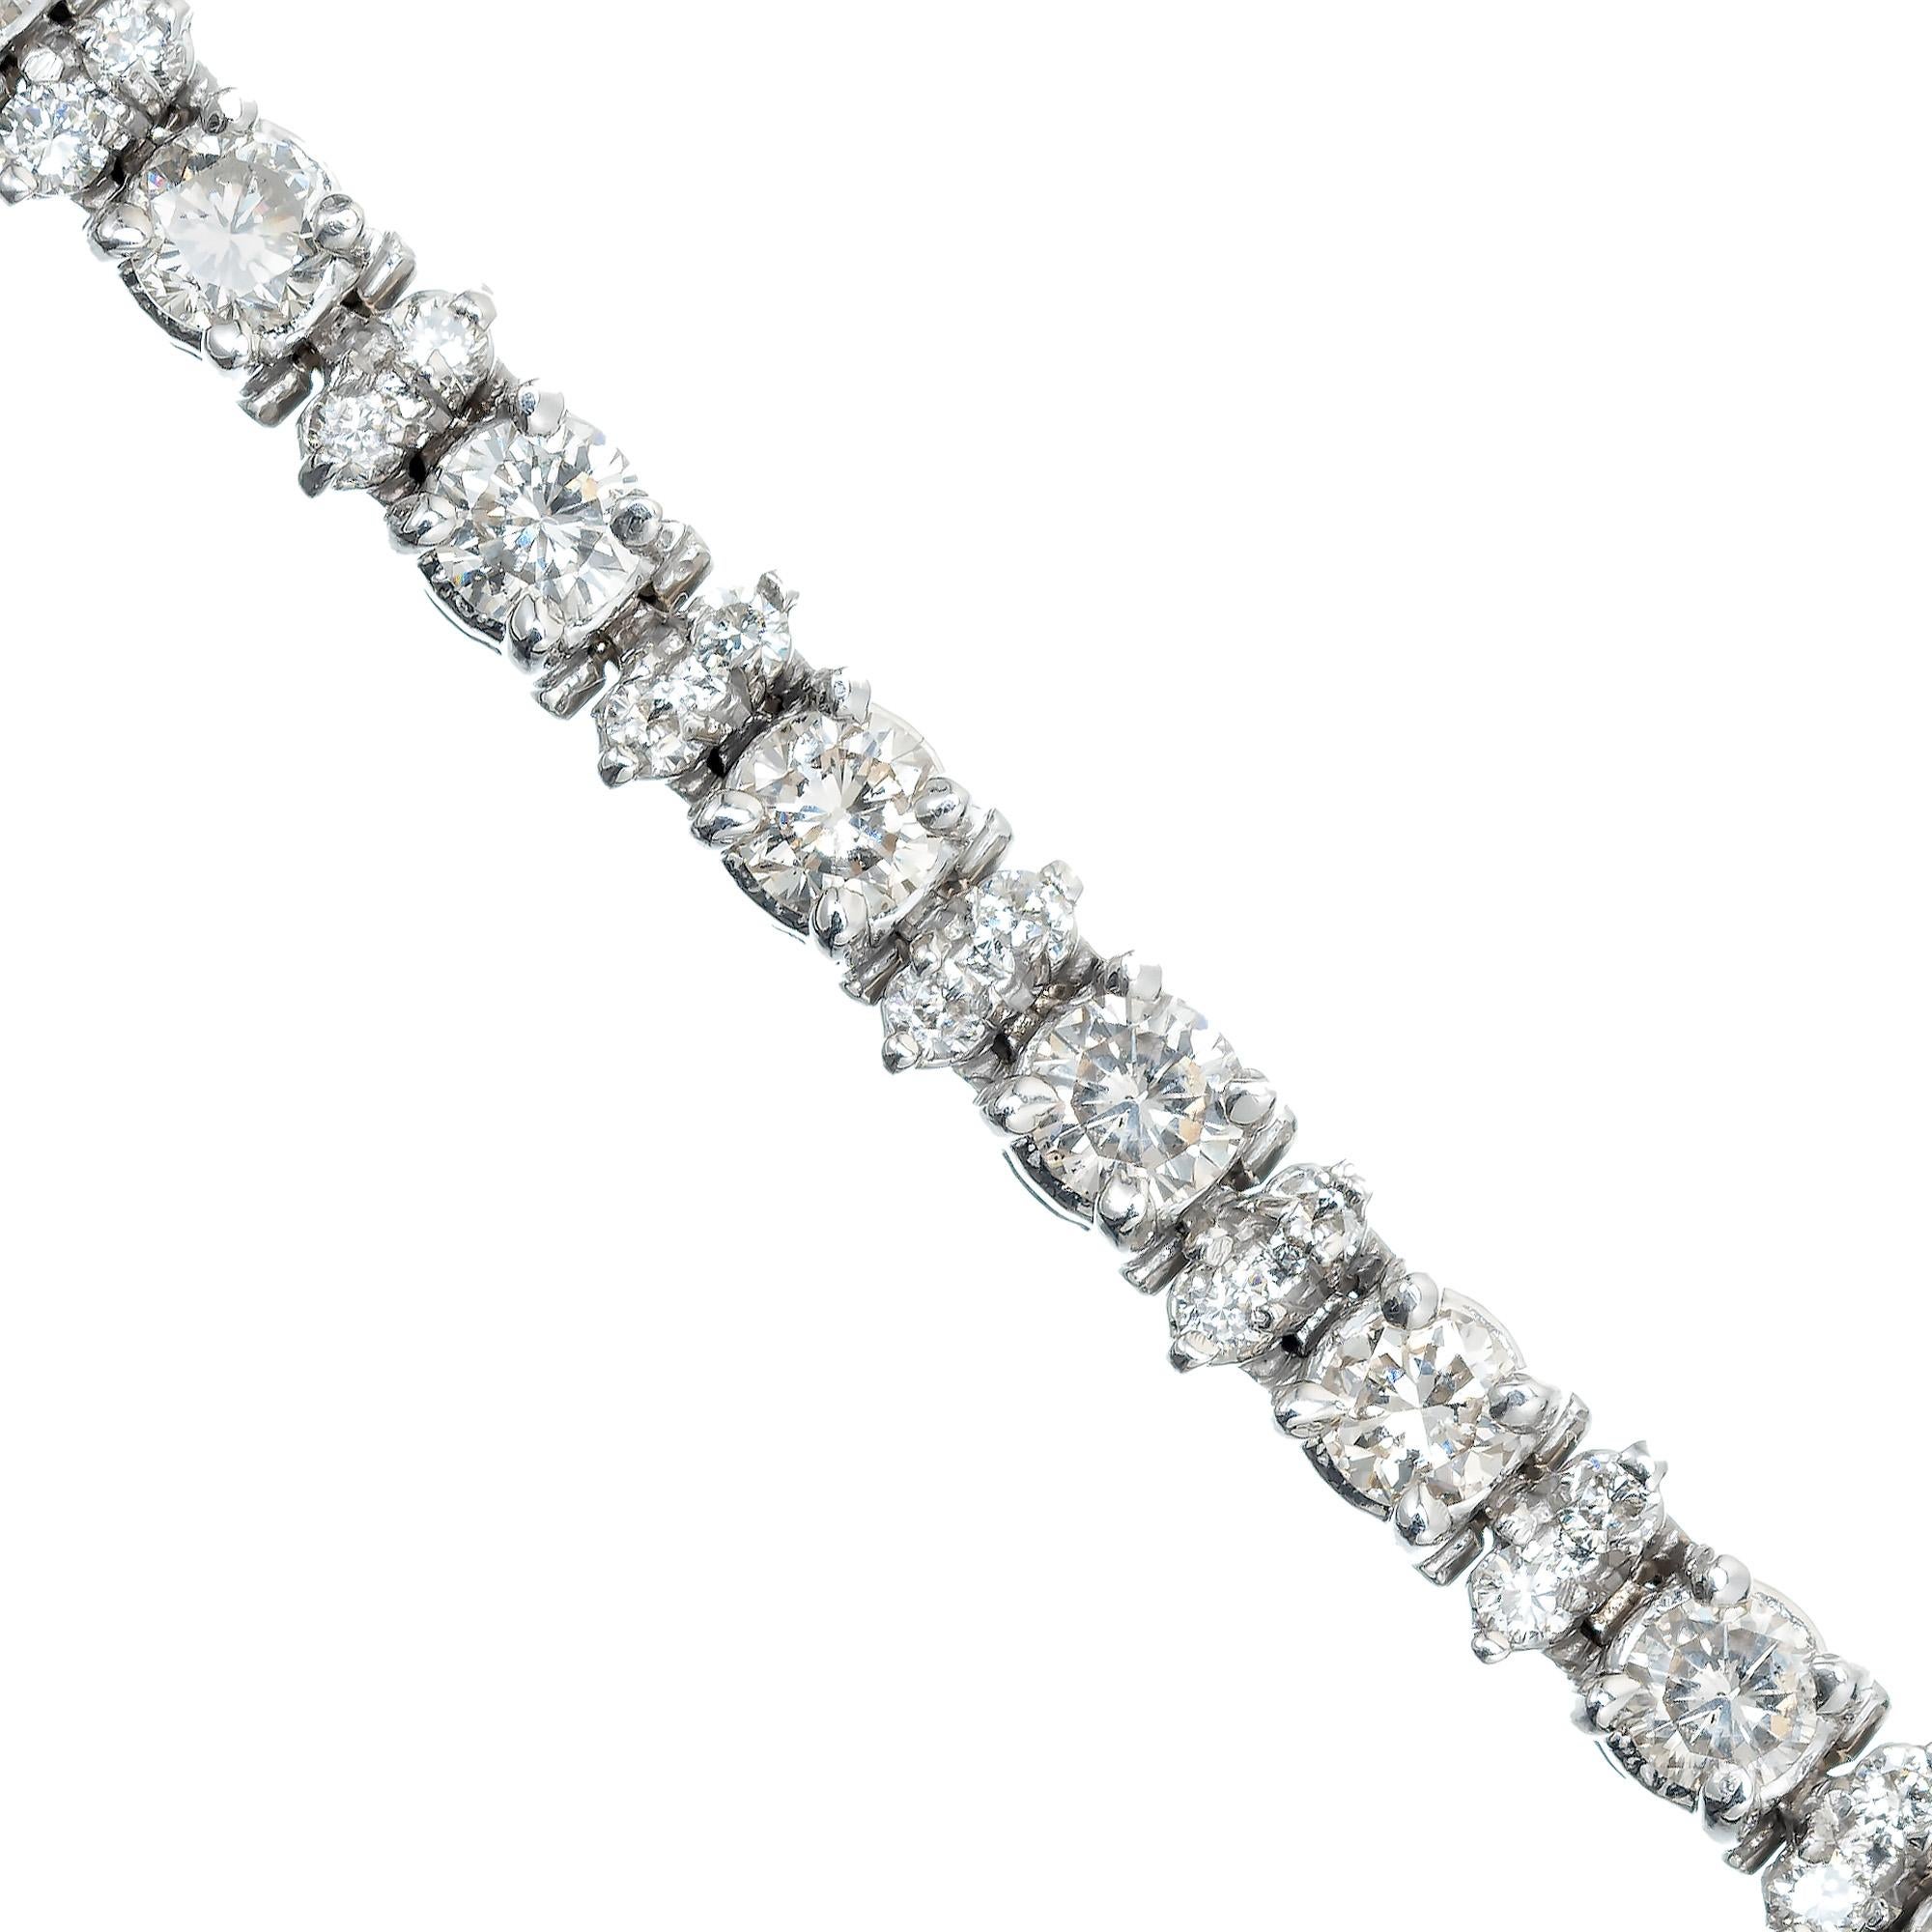 6.75 Carat Diamond 14k White Gold Hinged Tennis Bracelet In Good Condition For Sale In Stamford, CT